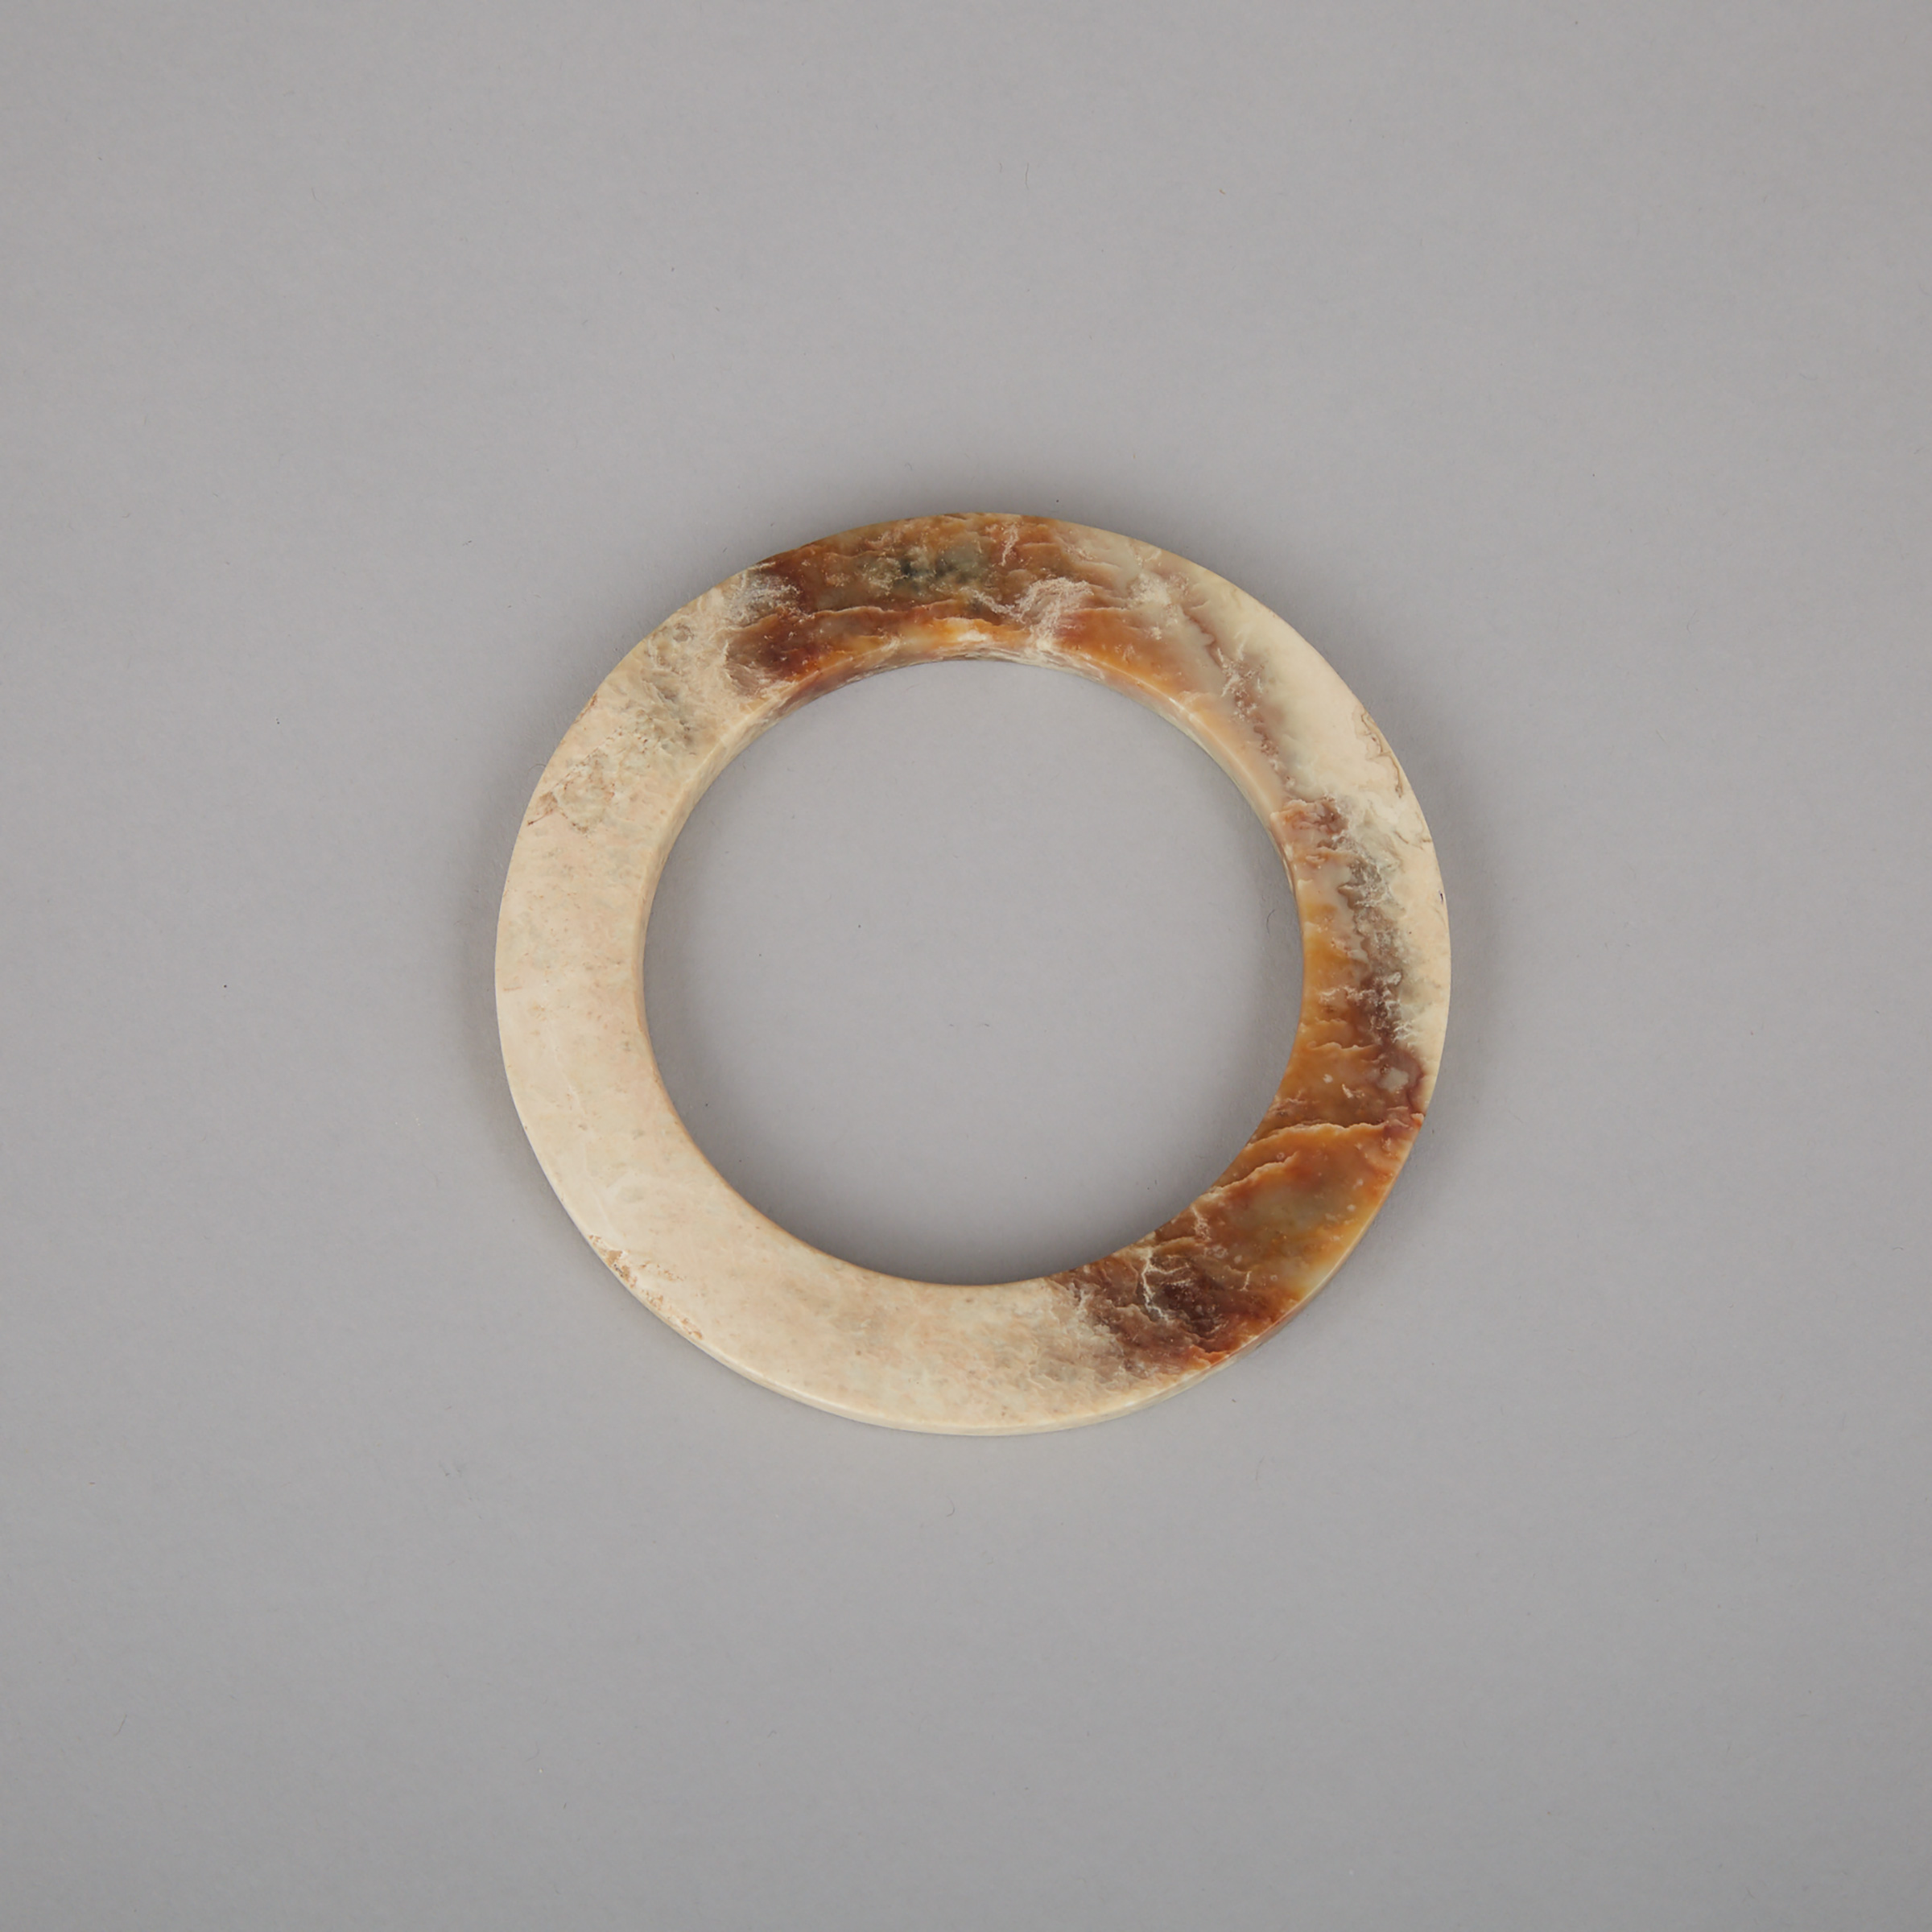 A Chinese Archaic Jade Disc Bracelet, Neolithic Period